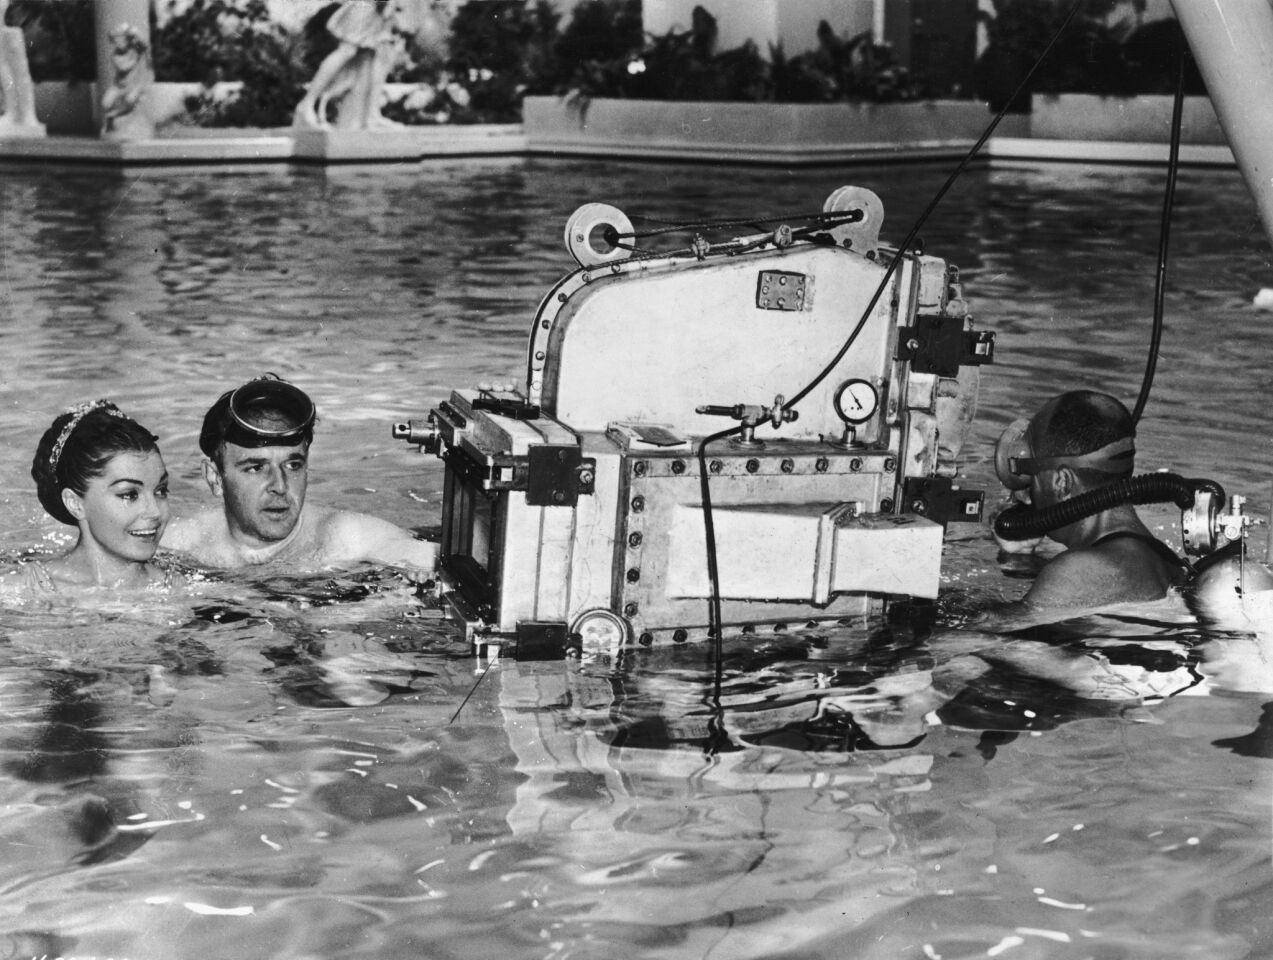 1955: Director George Sidney, left, wears a diving mask while directing American swimmer and actress Esther Williams on the set of his film "Jupiter's Darling." The cameraman is wearing scuba gear.